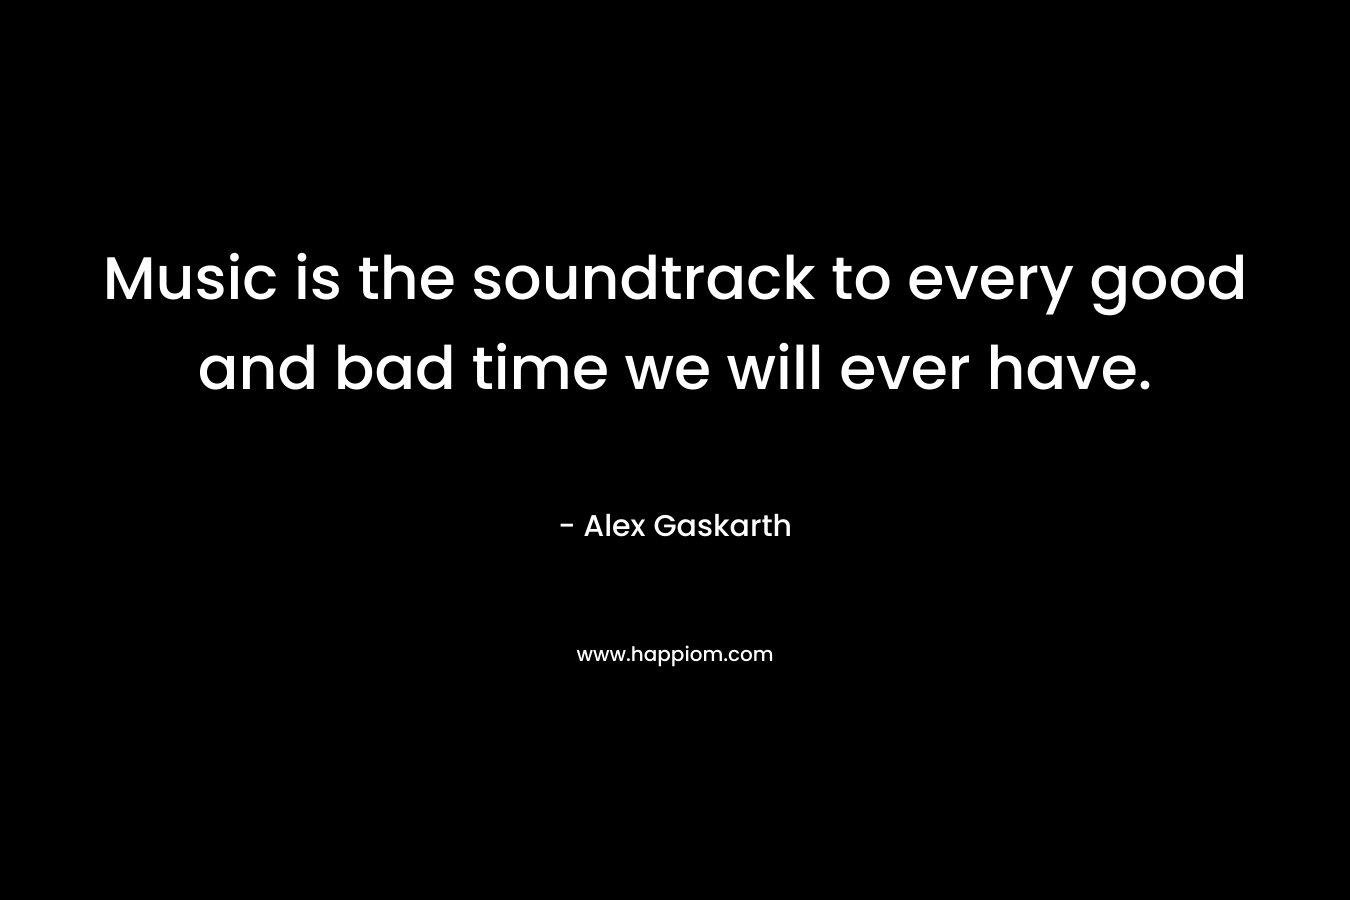 Music is the soundtrack to every good and bad time we will ever have. – Alex Gaskarth